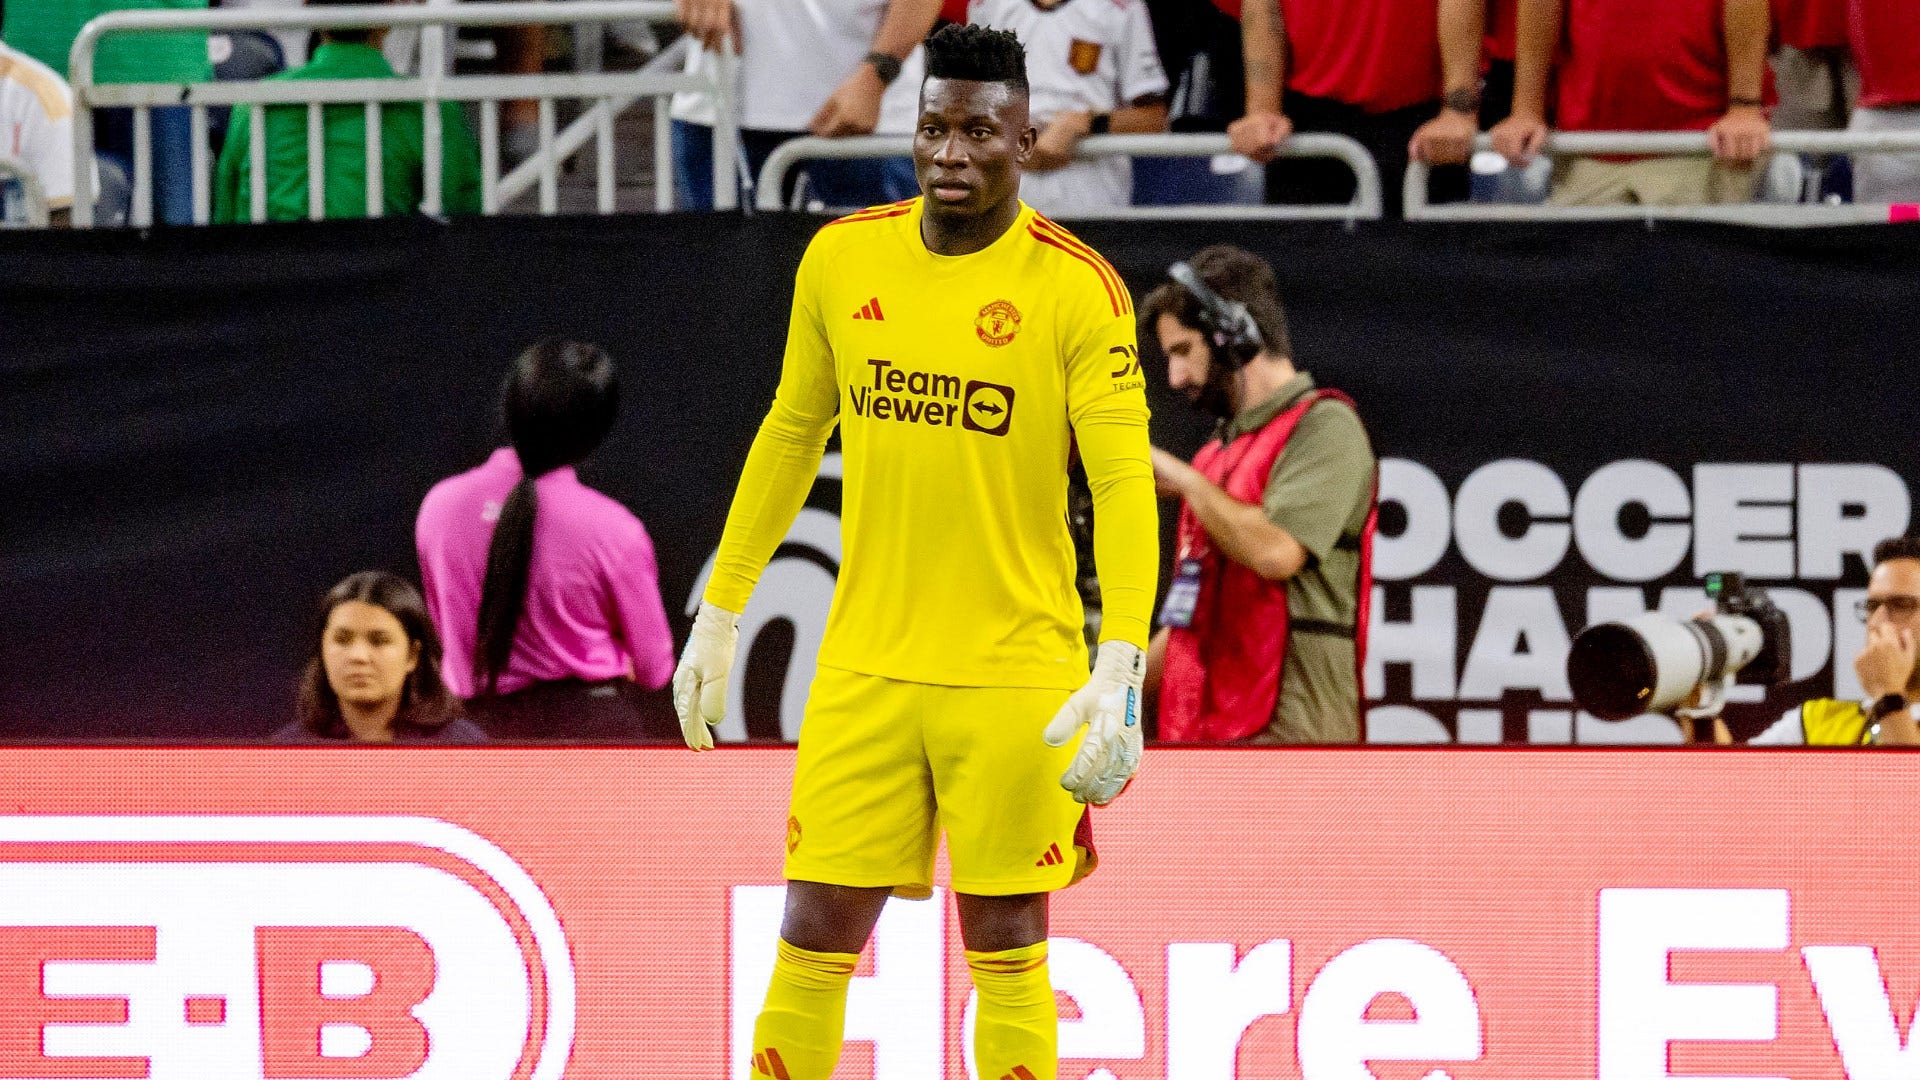  Andre Onana, the goalkeeper for Manchester United, is captured in action during a match.